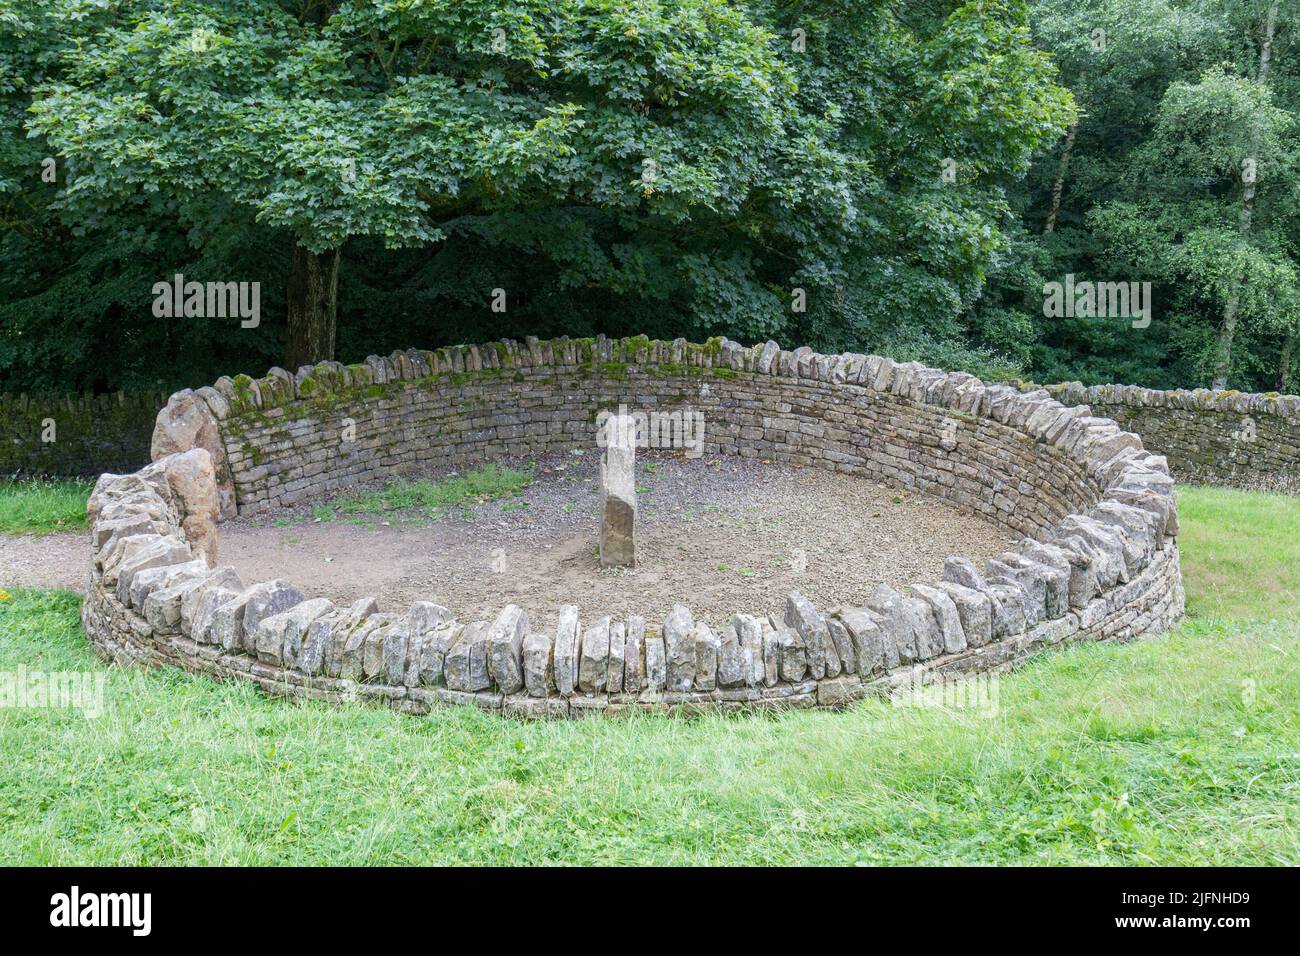 Example of a sheepfold, part of a dry stone walling exhibit, Shibden Park, Halifax, Yorkshire, UK. Stock Photo